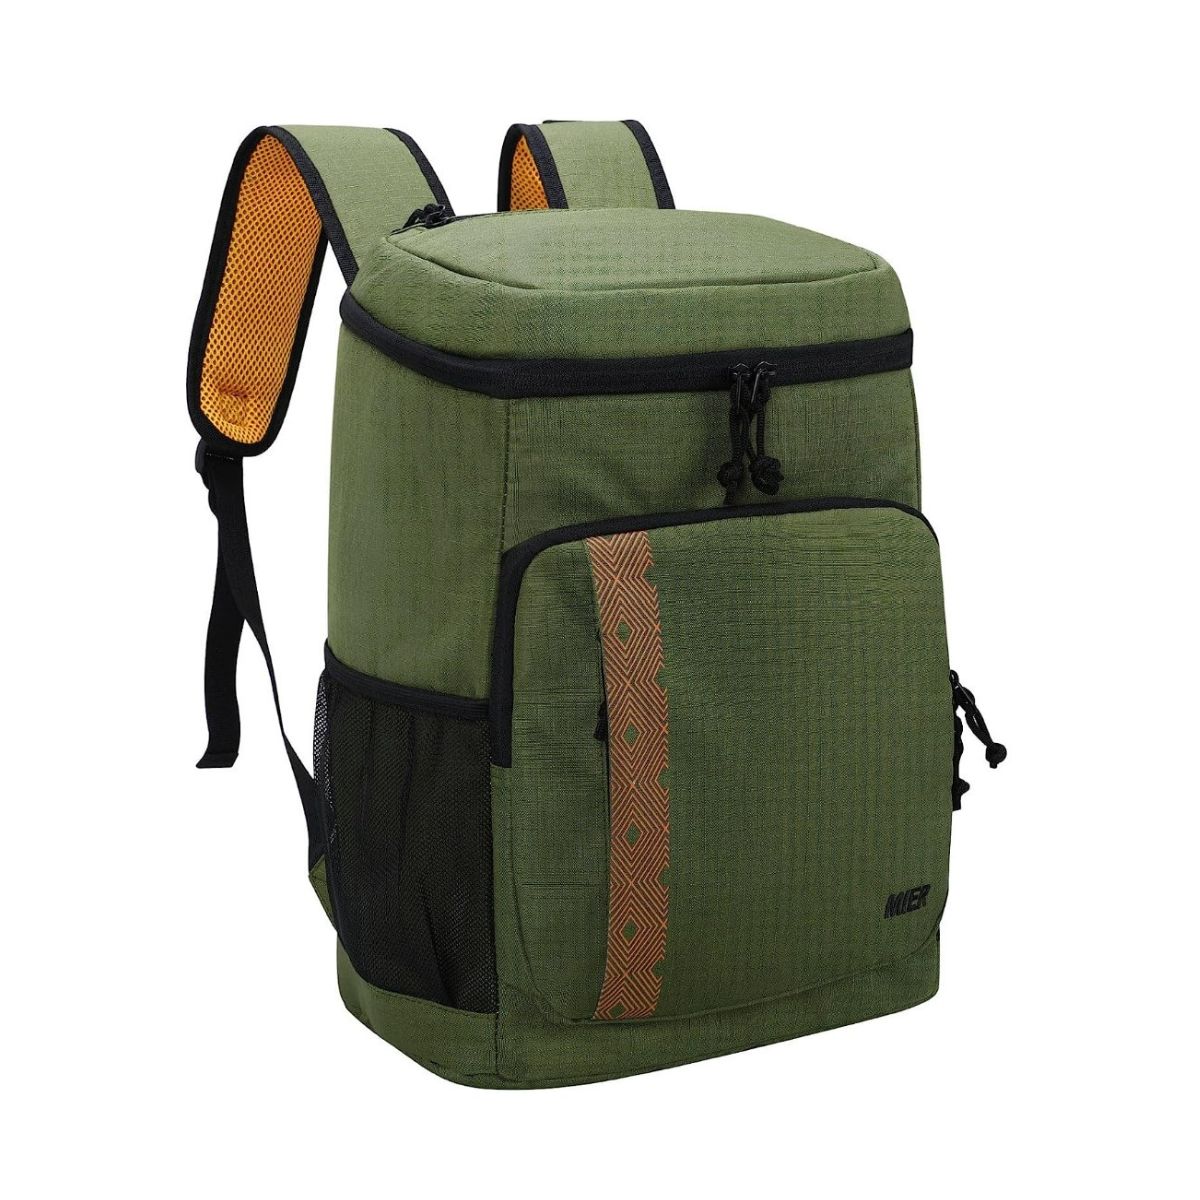 Green backpack lunch box with brown and black trim.